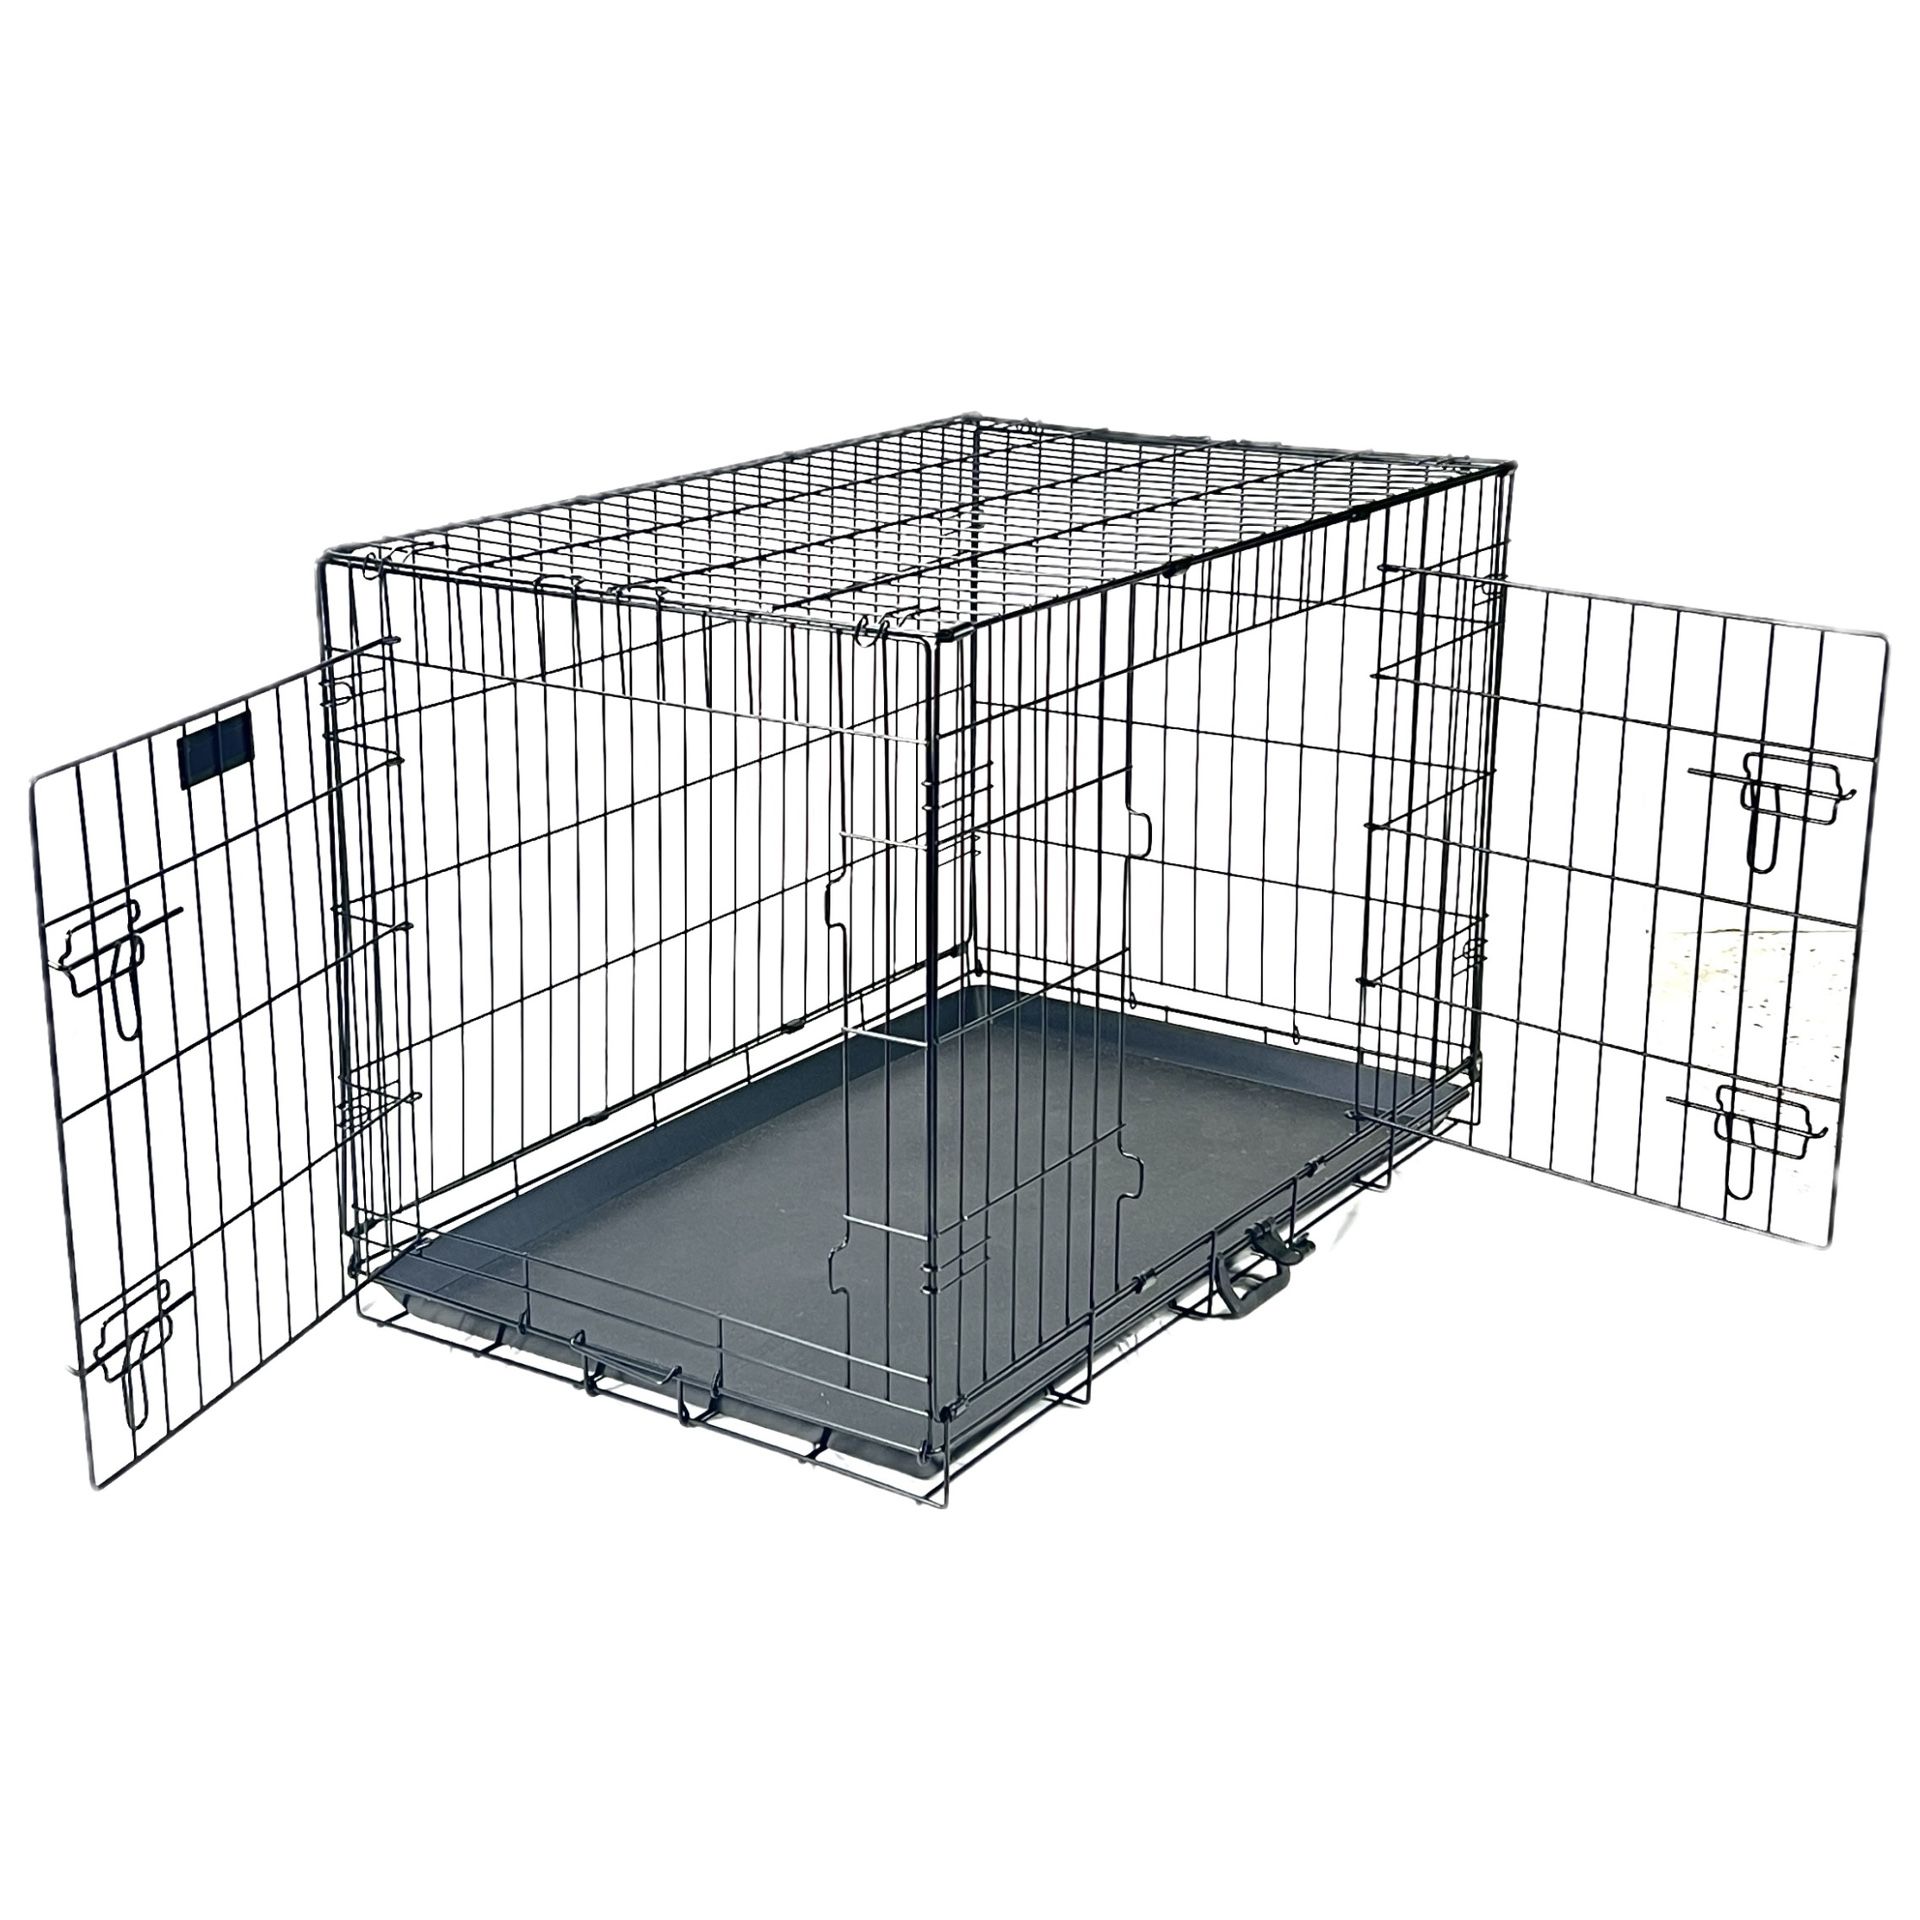 Dog Crate, Wire Double Door Cage For Dog, 36”